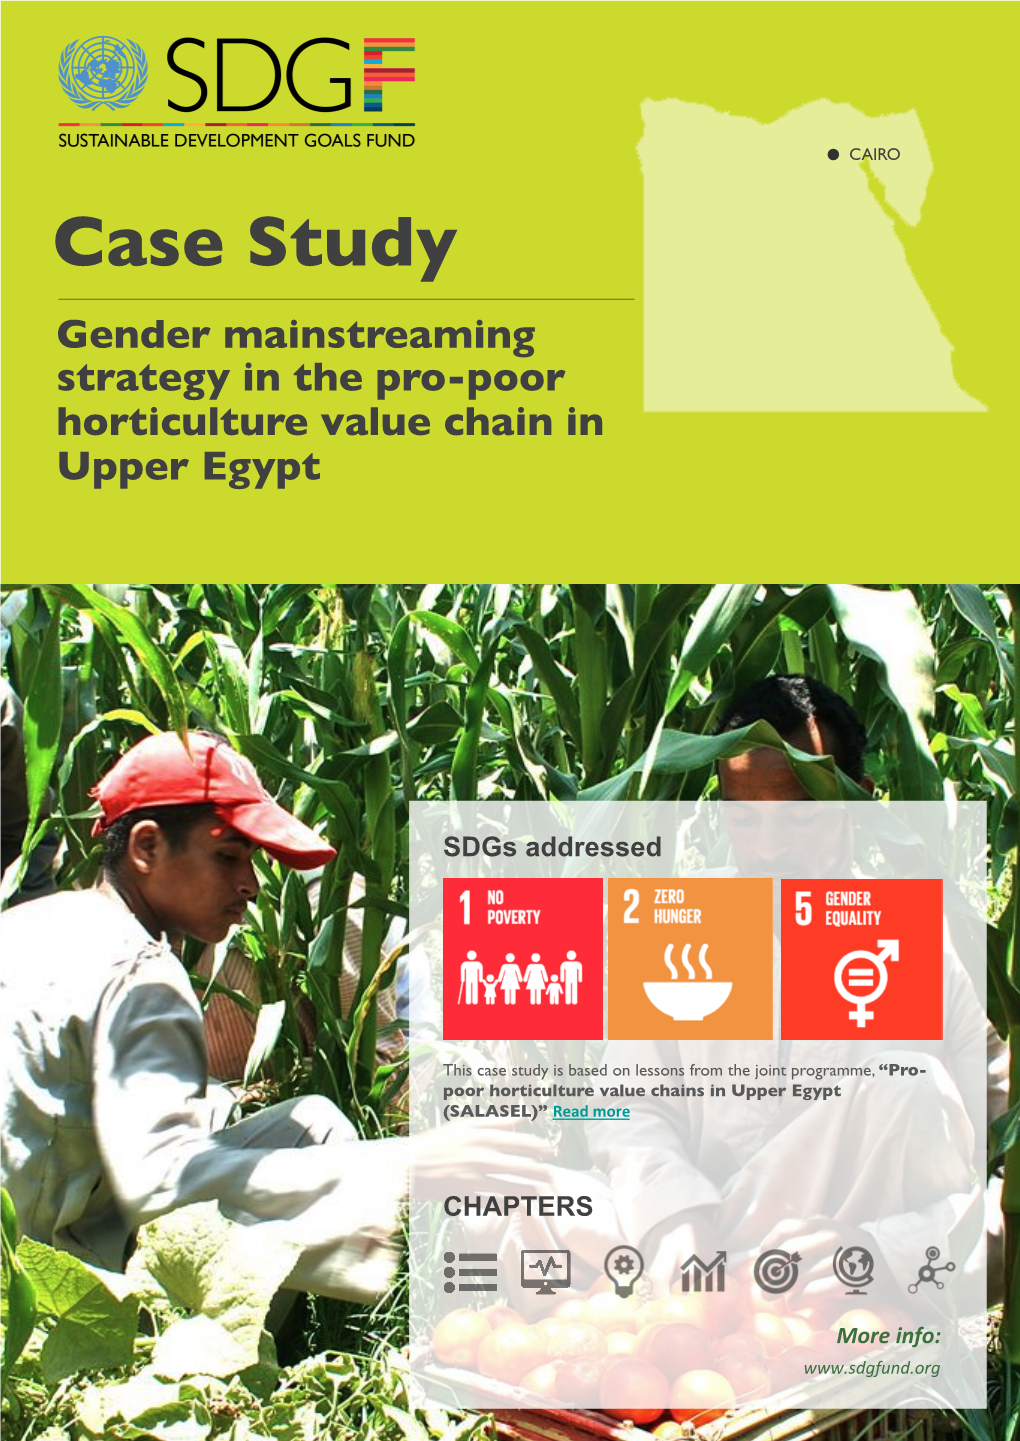 Case Study Gender Mainstreaming Strategy in the Pro-Poor Horticulture Value Chain in Upper Egypt